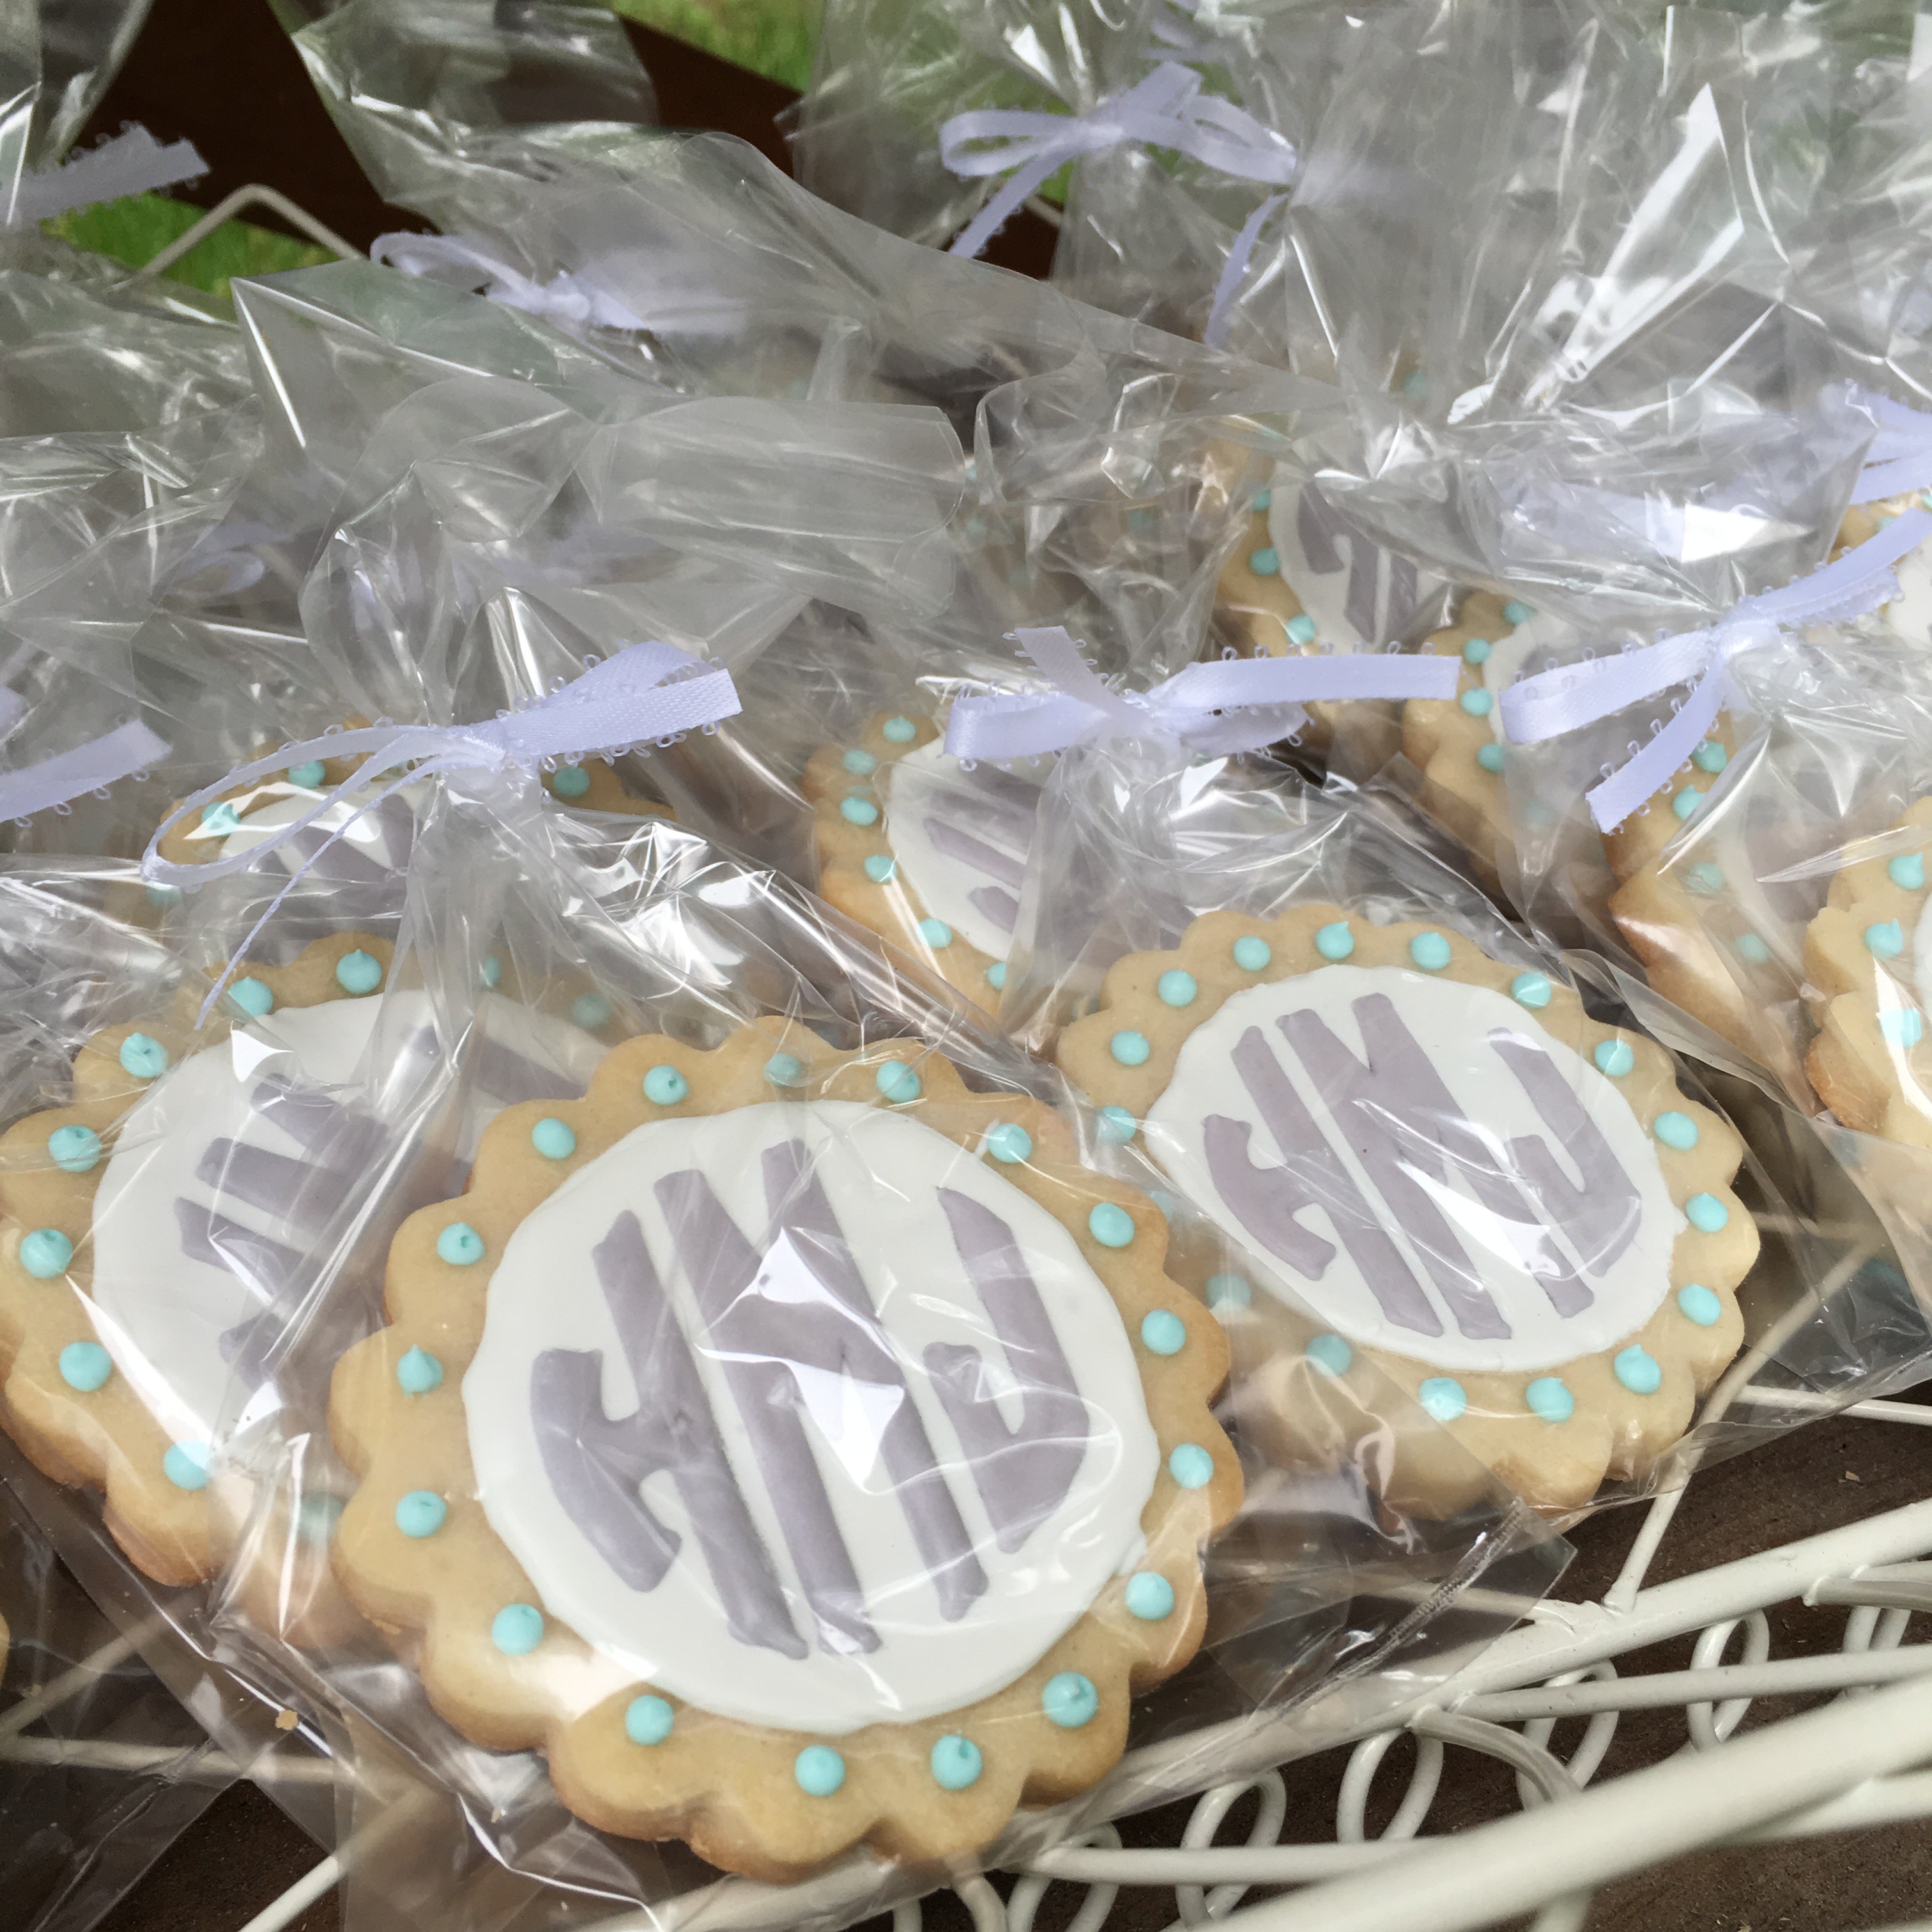 A Whale of a Party Welcome to Hunter's First Birthday Party Main From the Family With Love Monogram Cookie Favors